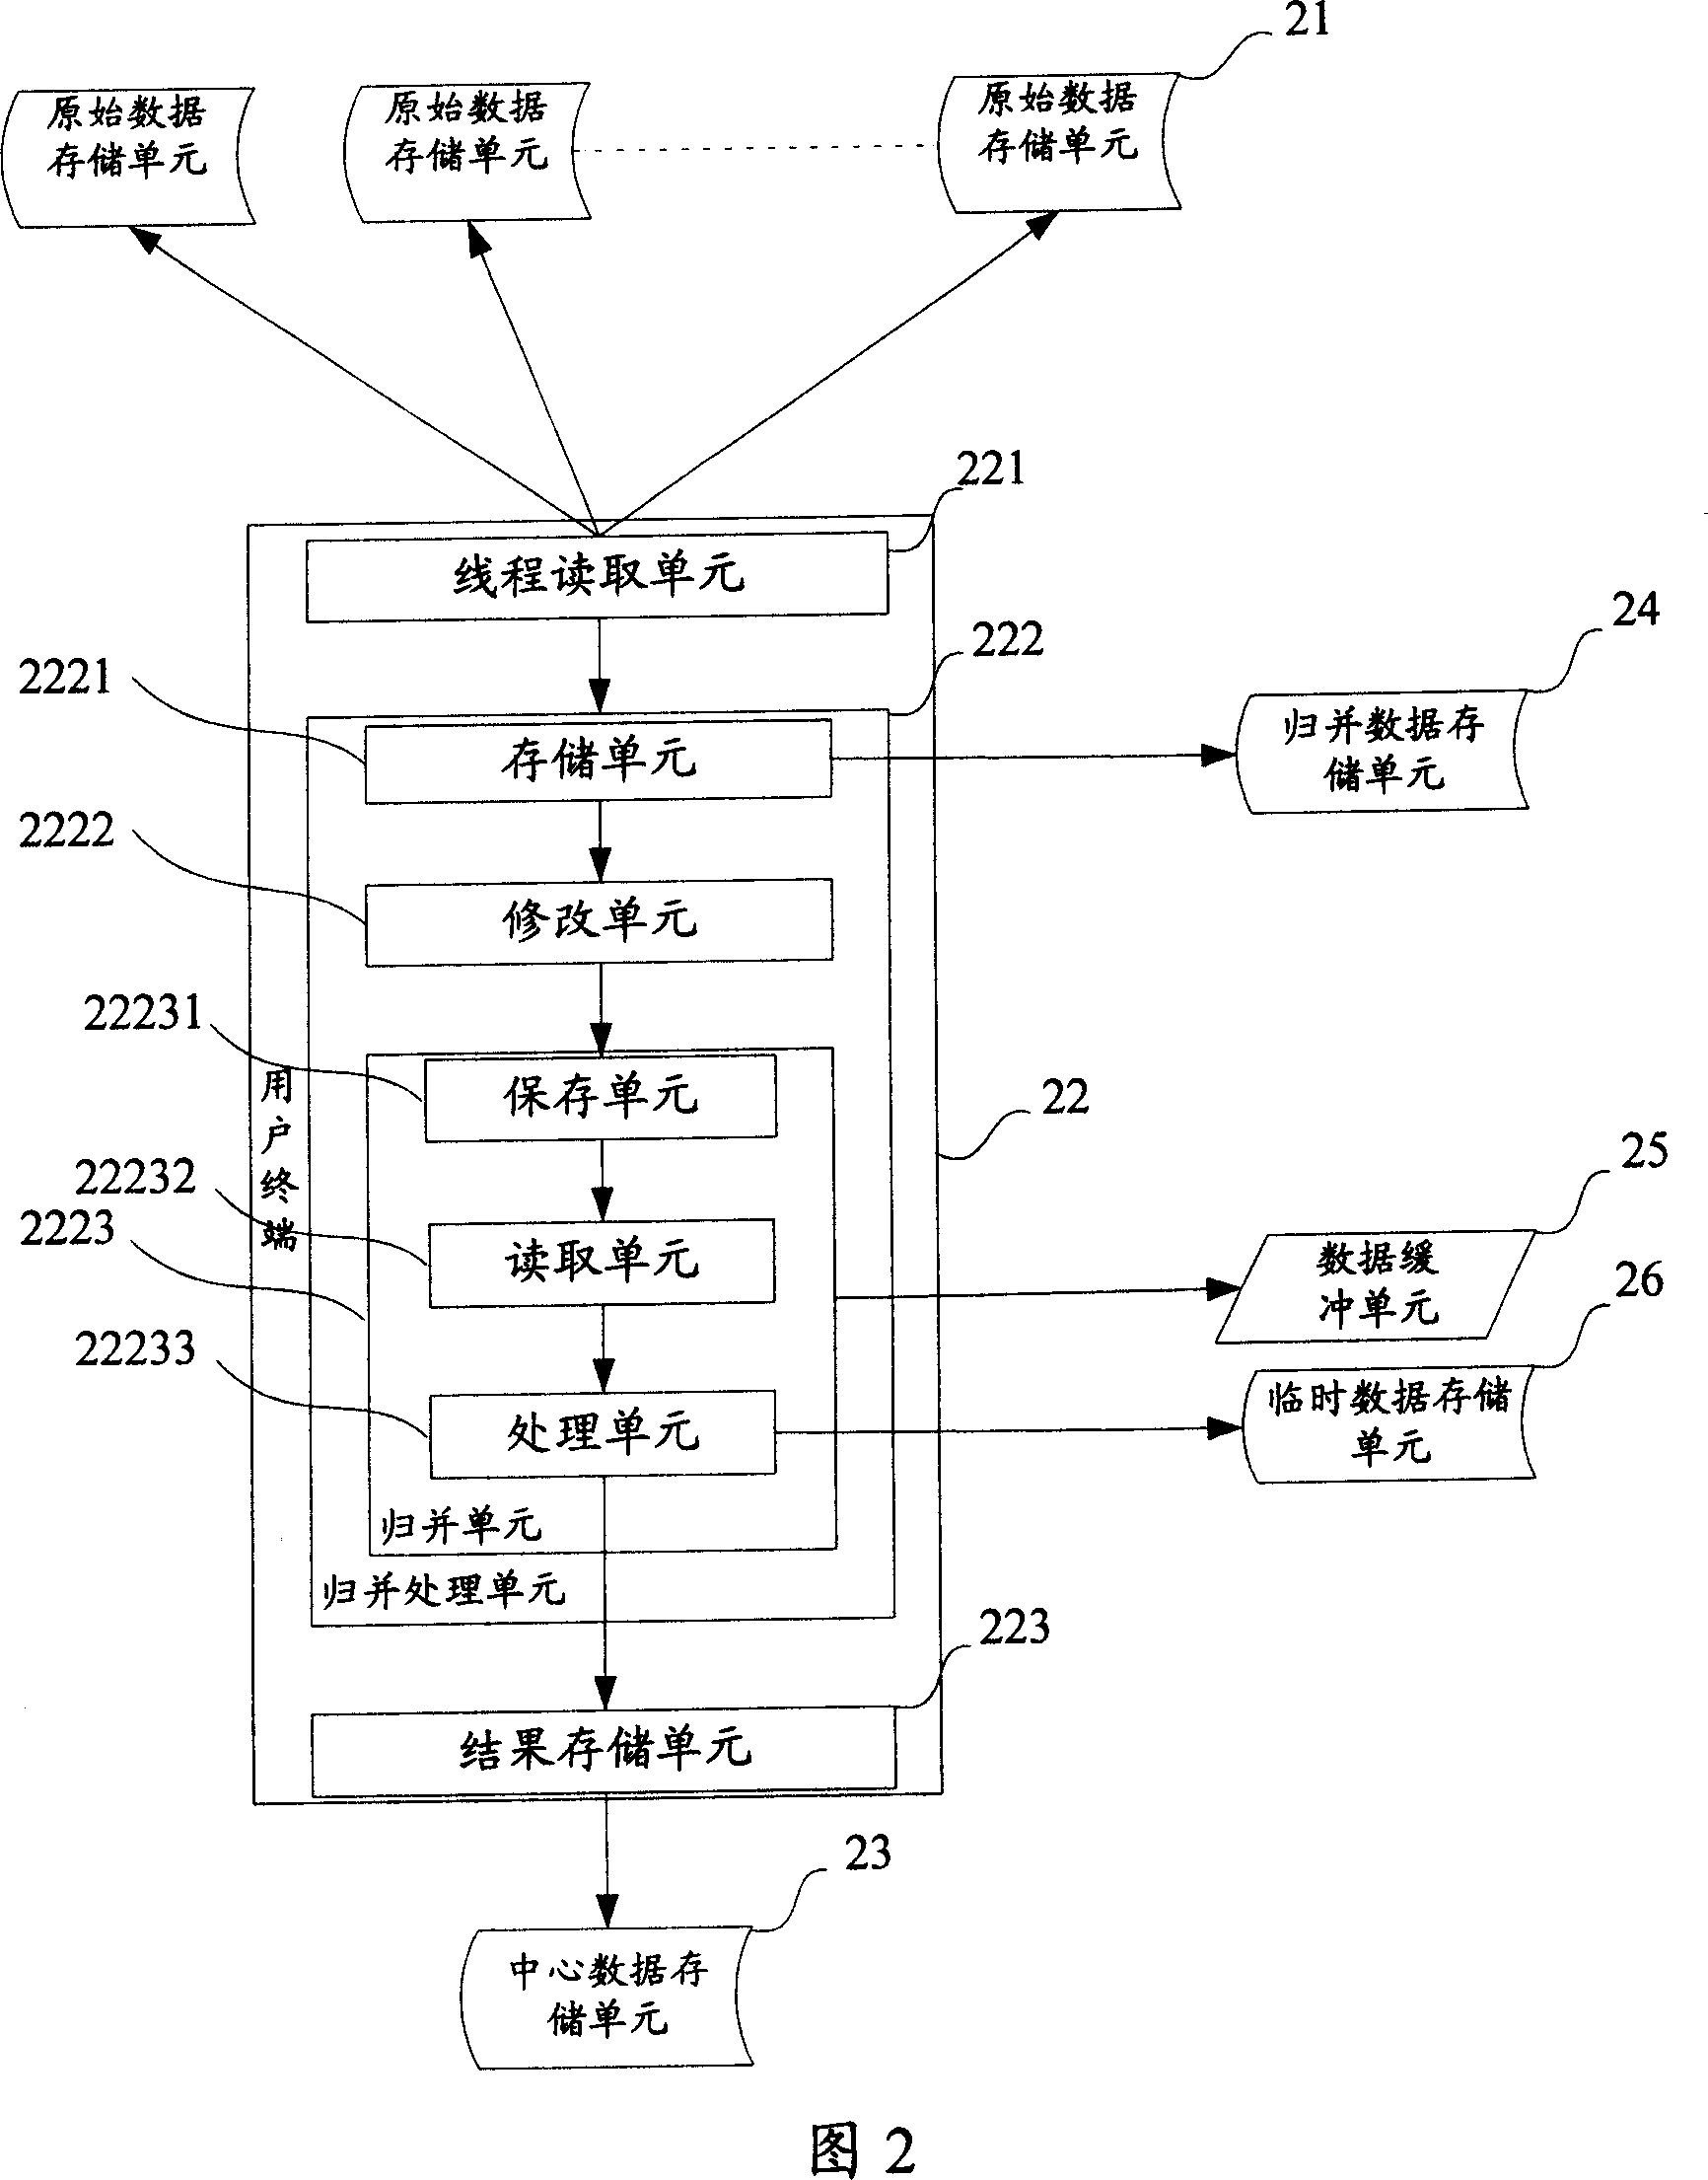 Information merging method and system